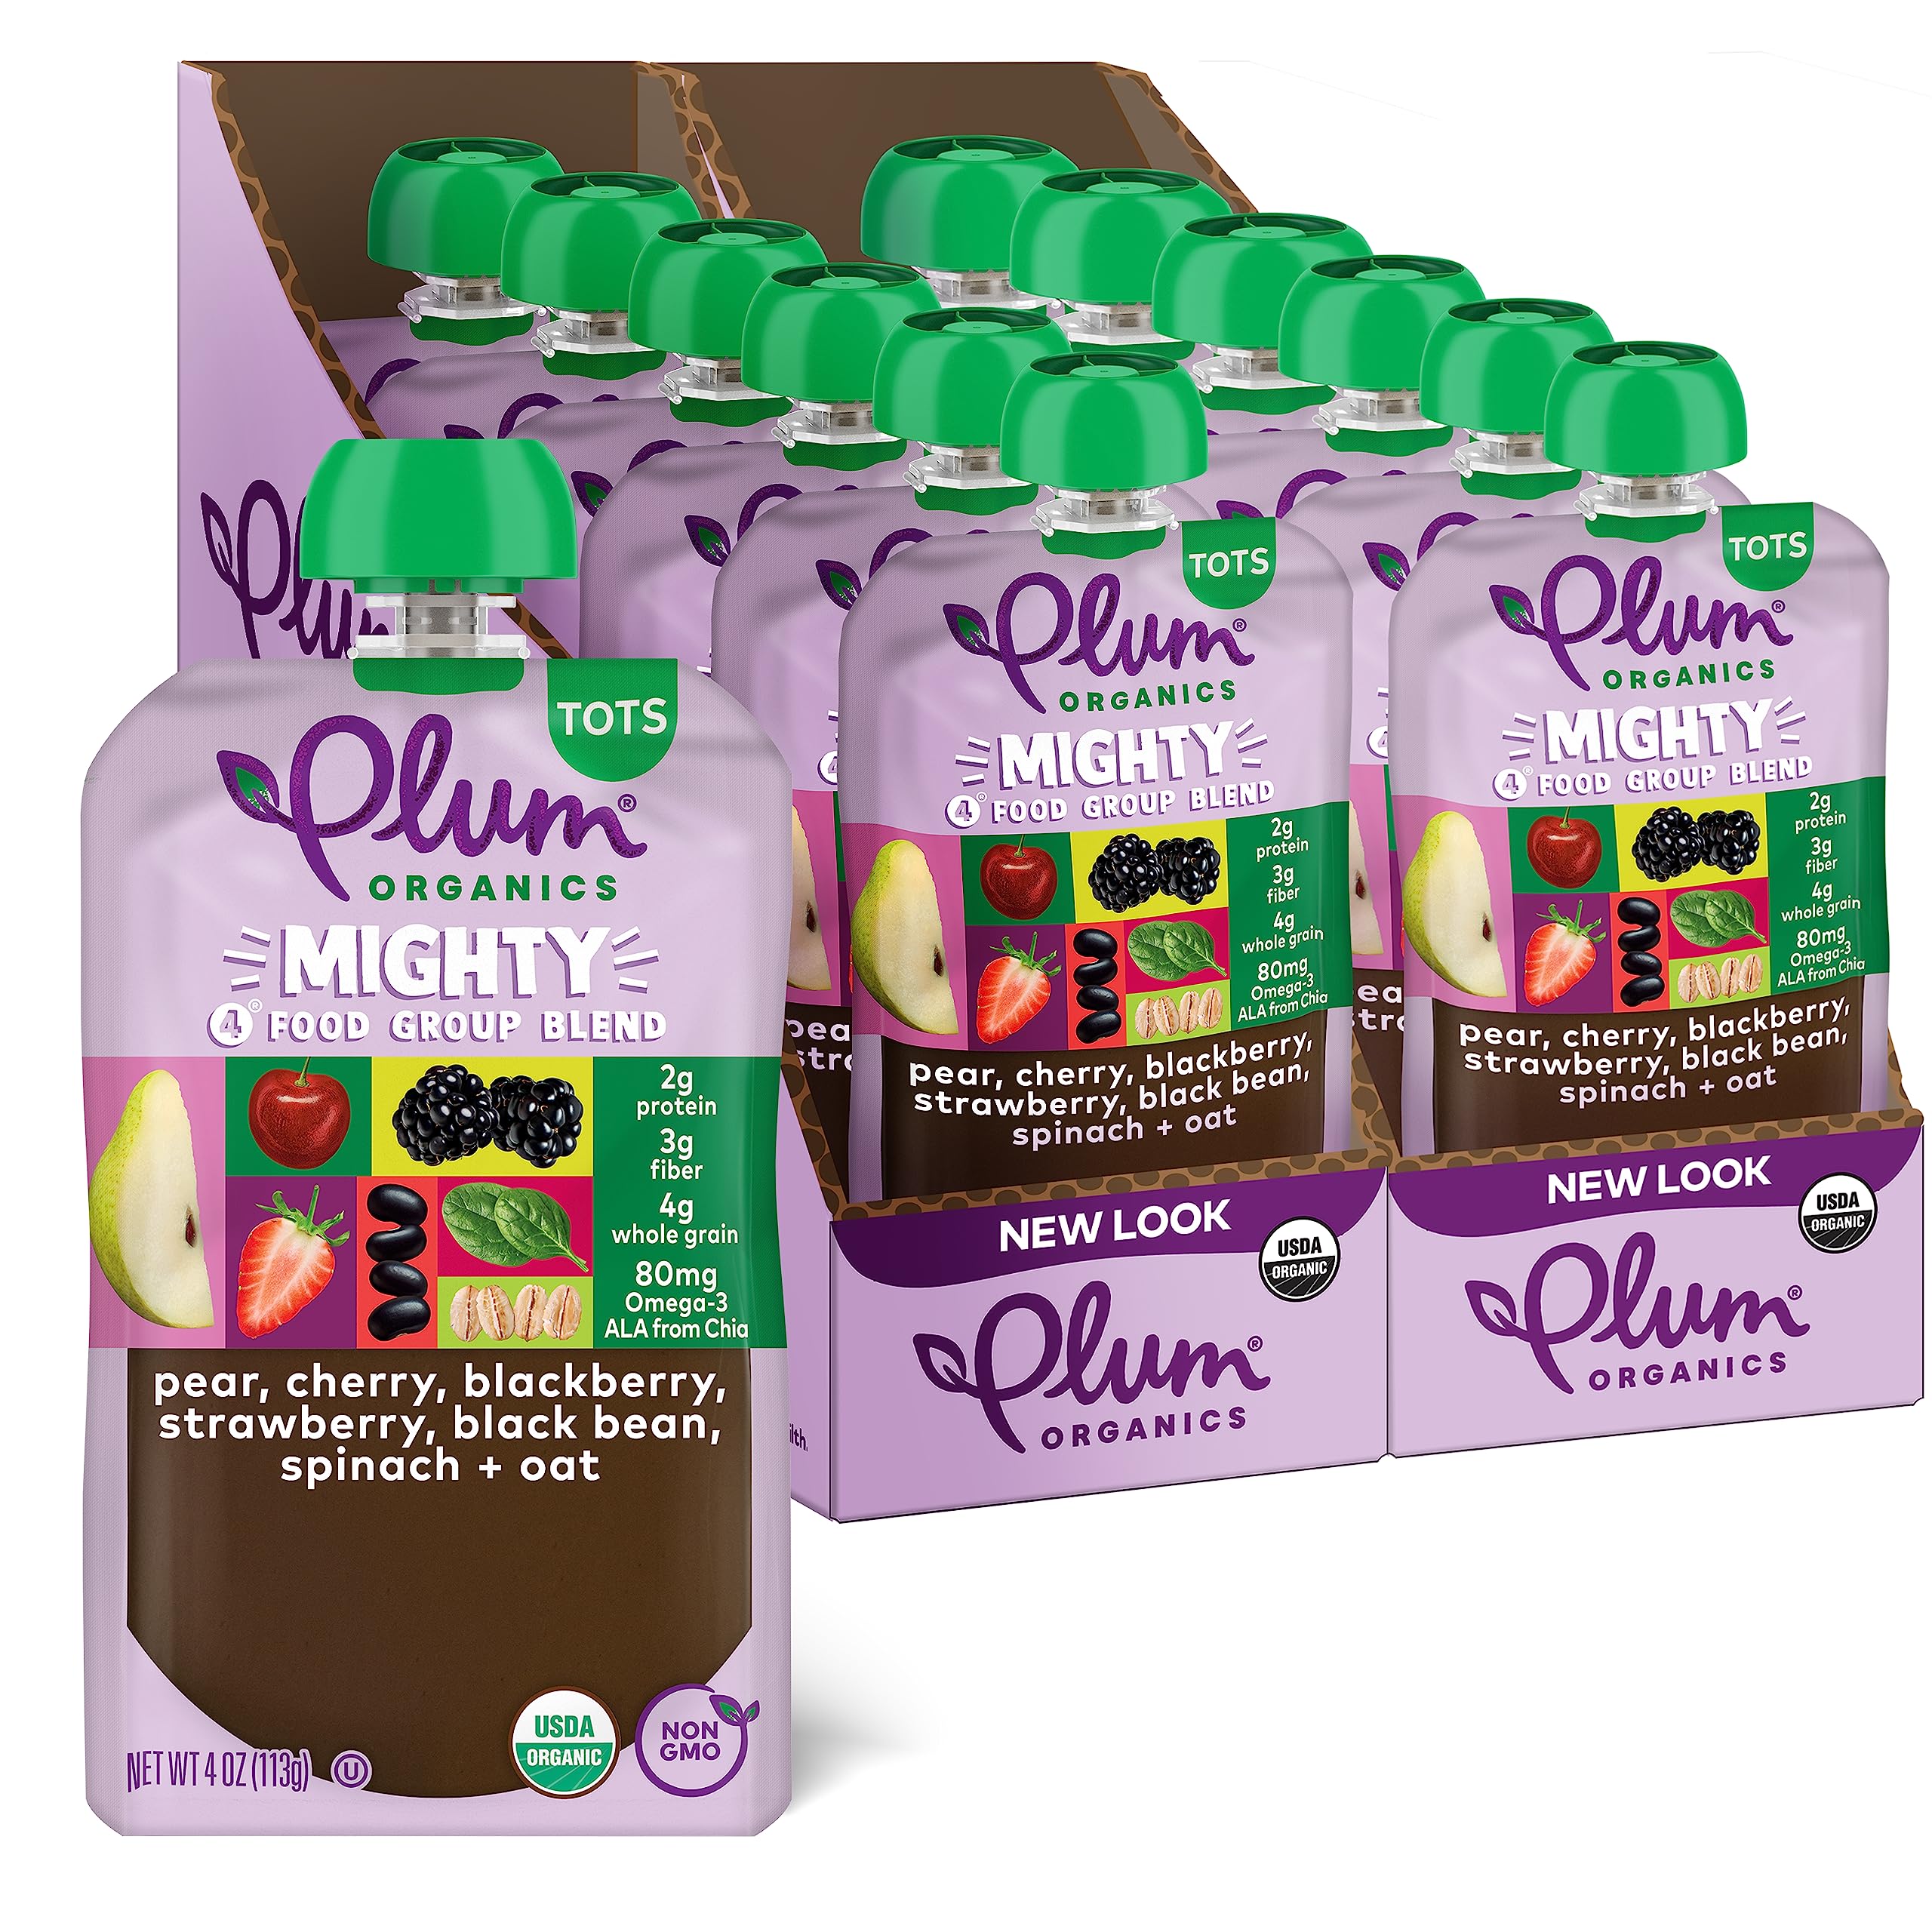 12-Pack 4-Ounce Plum Organics Mighty Food Group Blend Baby Food Meals $4.08 w/ S&S + Free Shipping w/ Prime or on $35+